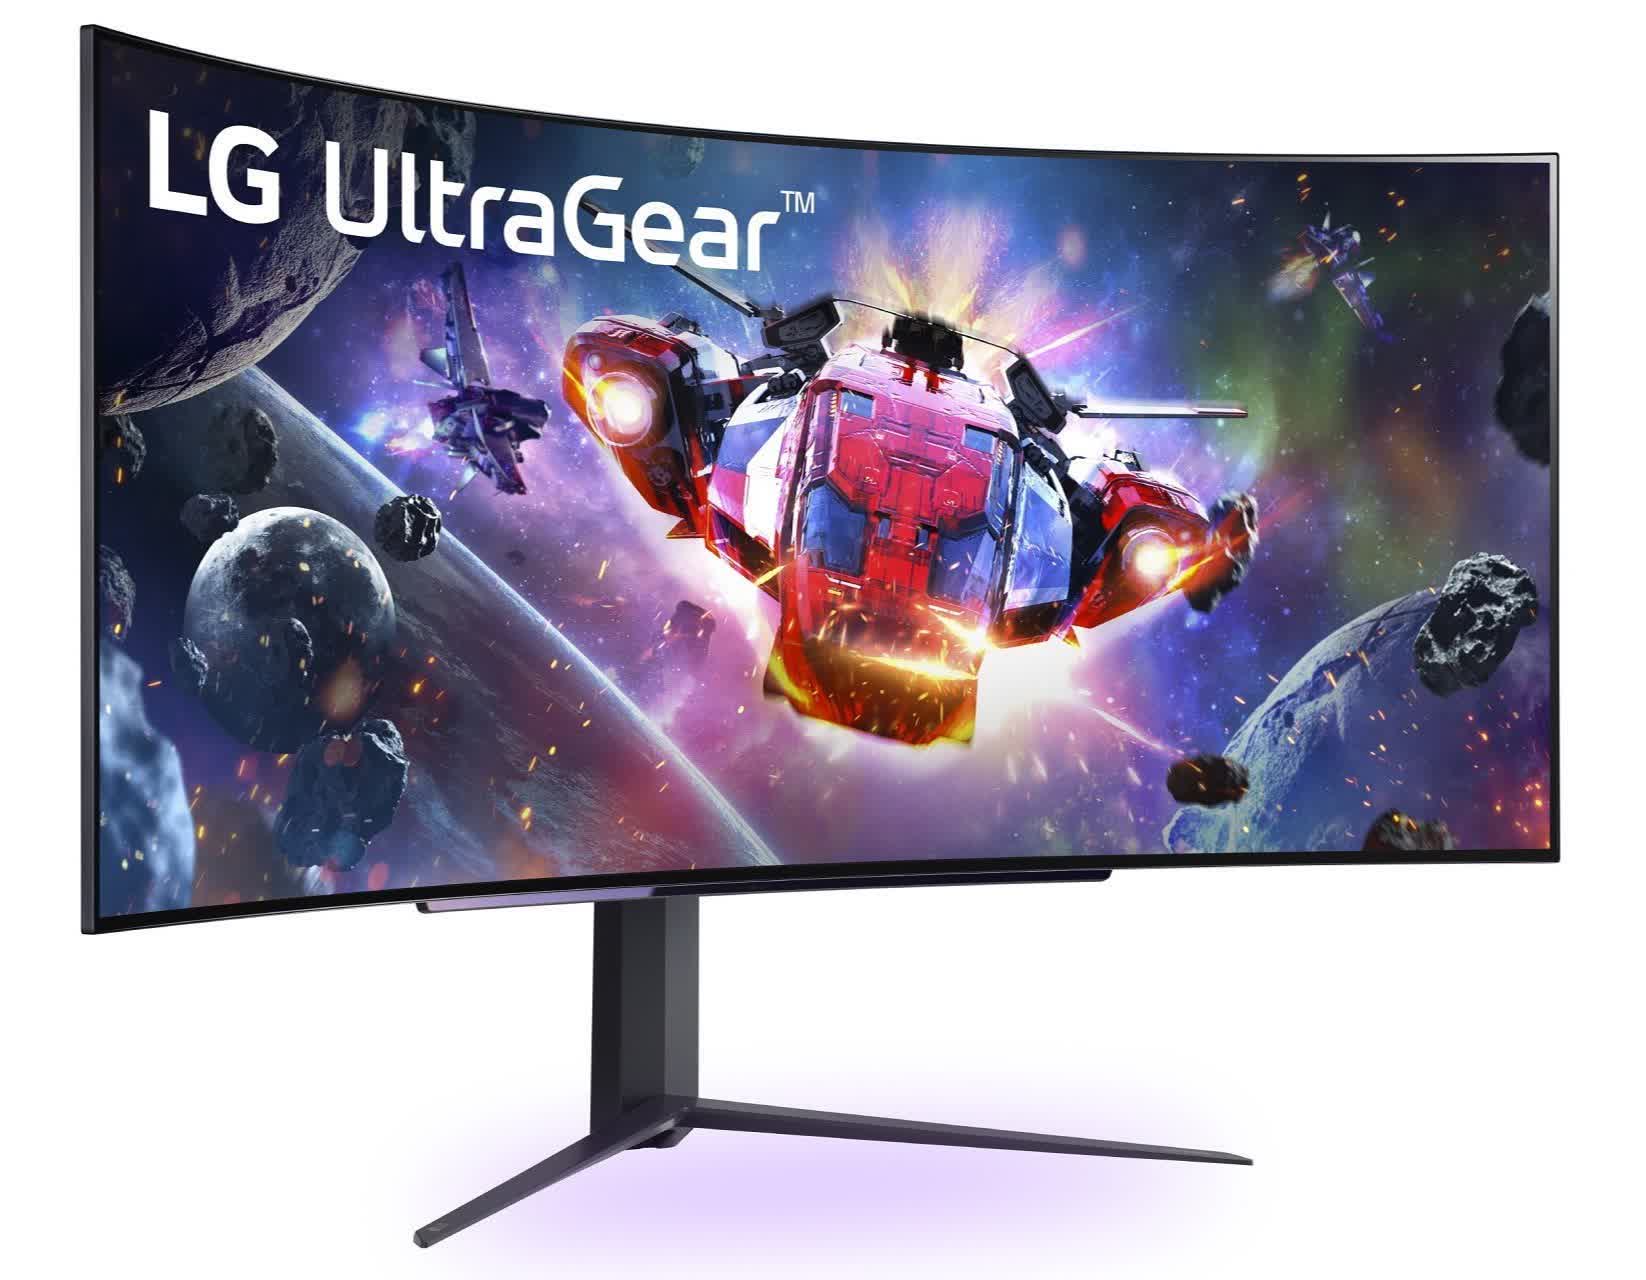 LG unveils 45-inch OLED gaming monitor with 240Hz refresh rate